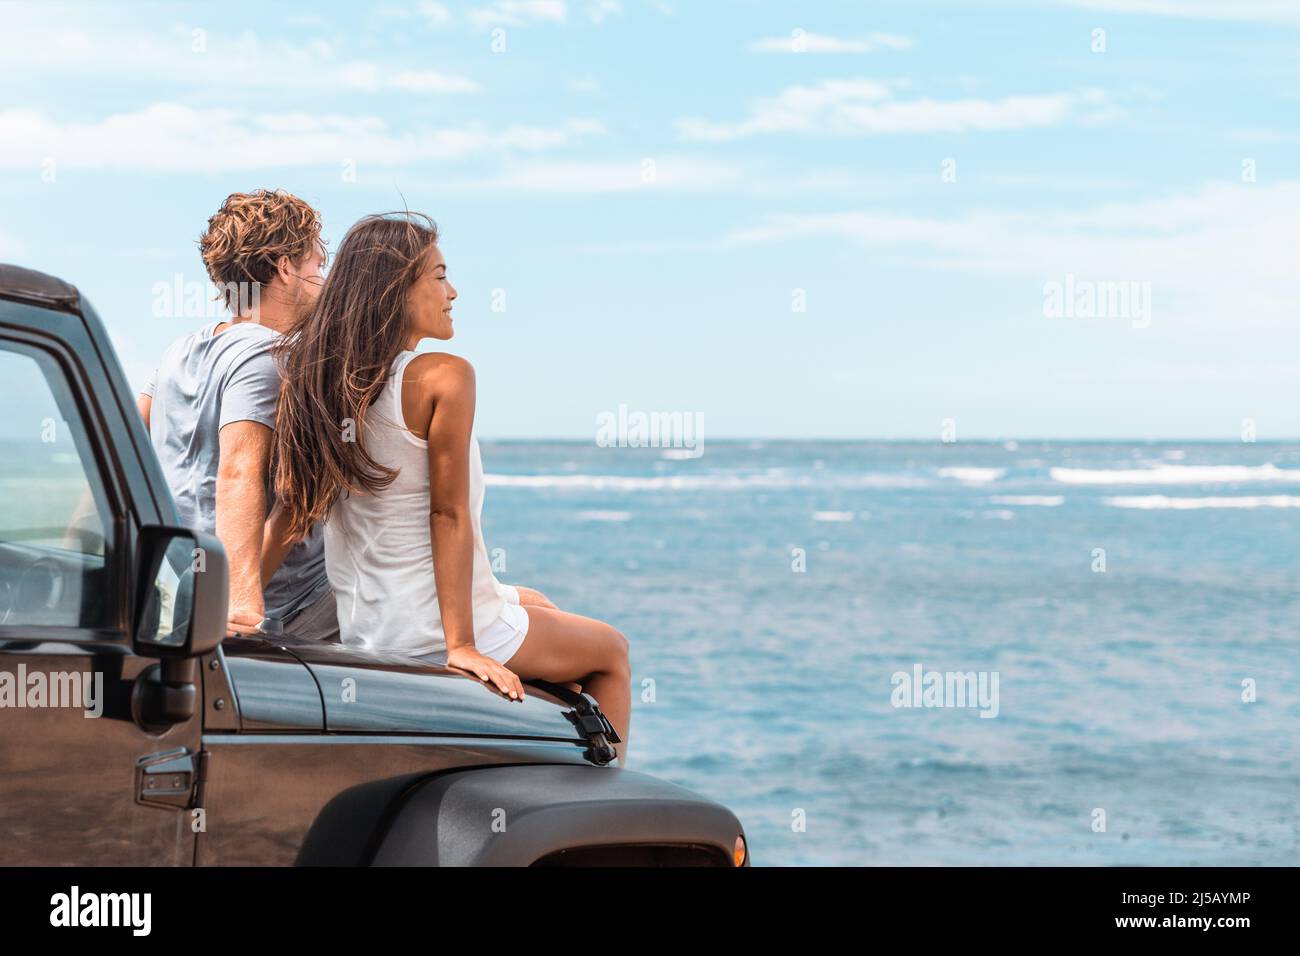 Car road trip travel couple tourists enjoying ocean view relaxing on hood of sports utility car. Happy Asian woman, man friends smiling on beach. Stock Photo